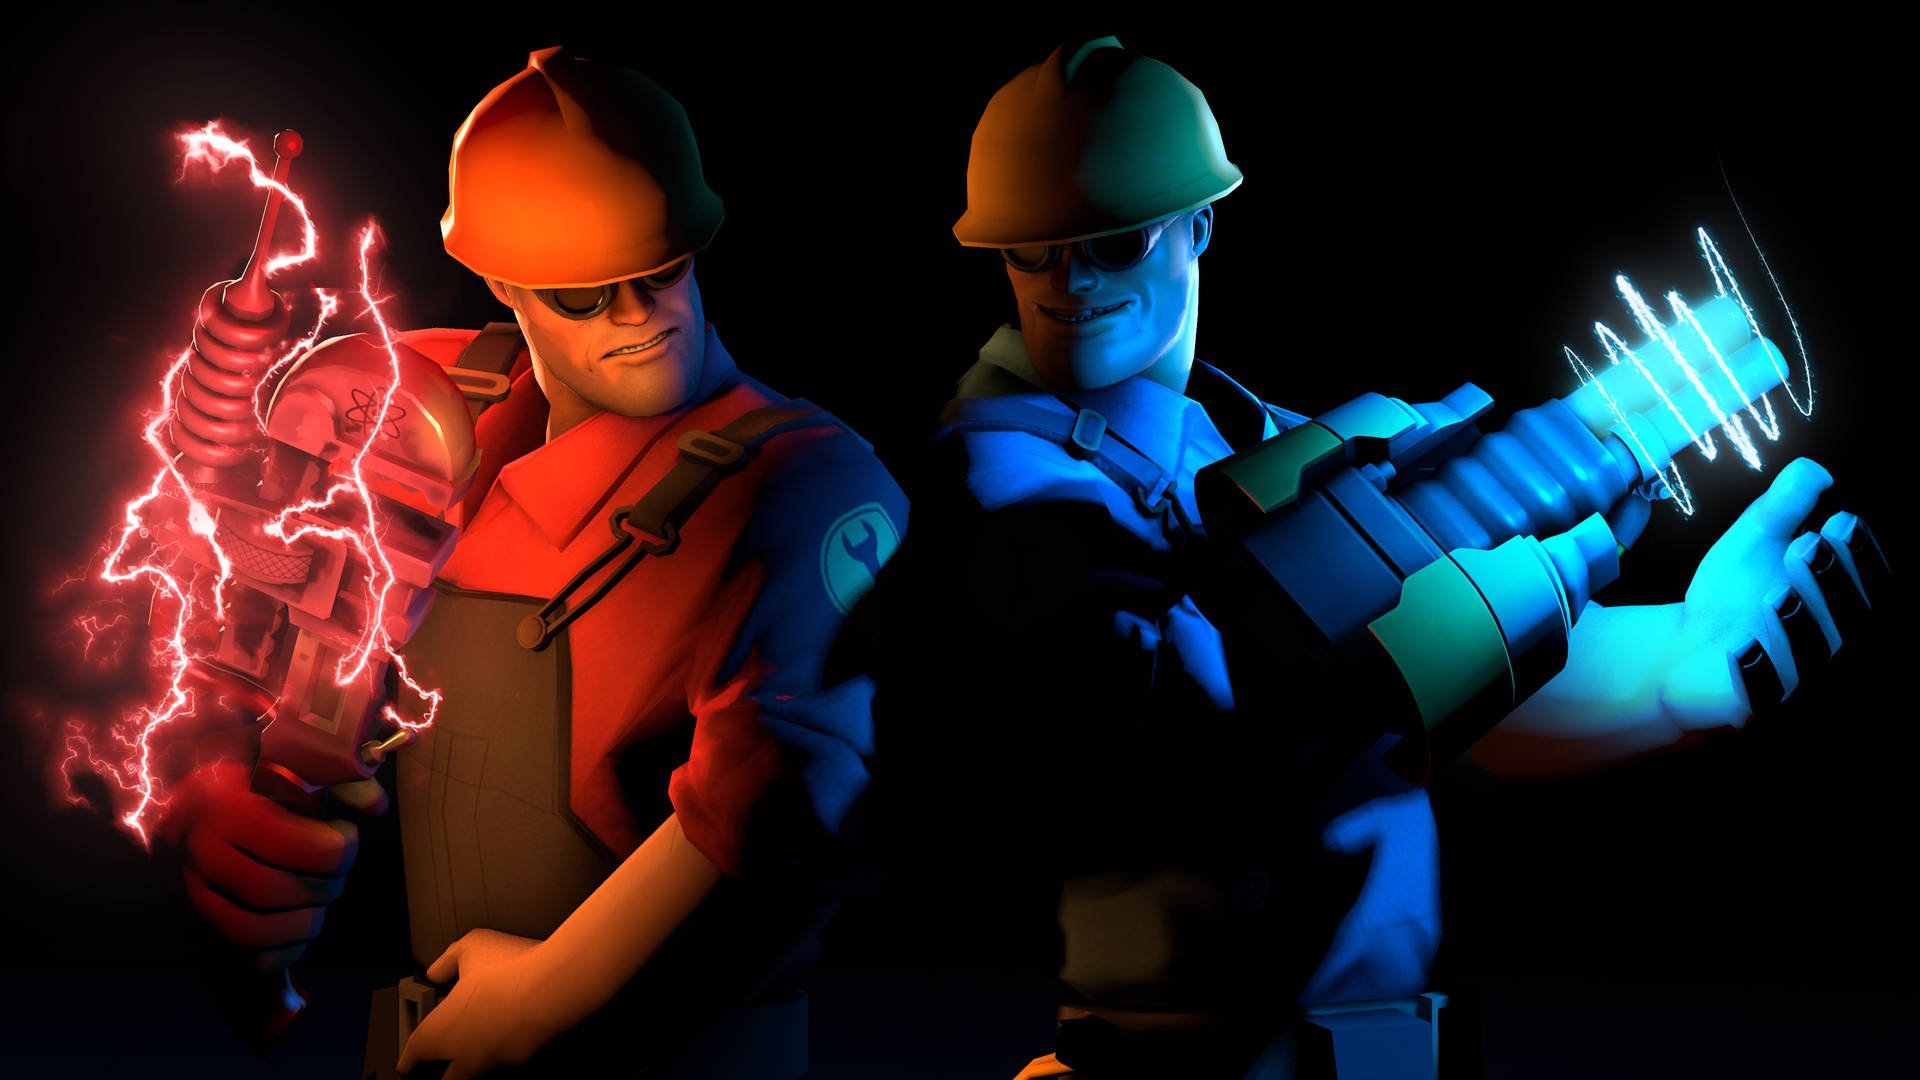 Download Tf2 4k Engineer Blue And Red Wallpaper